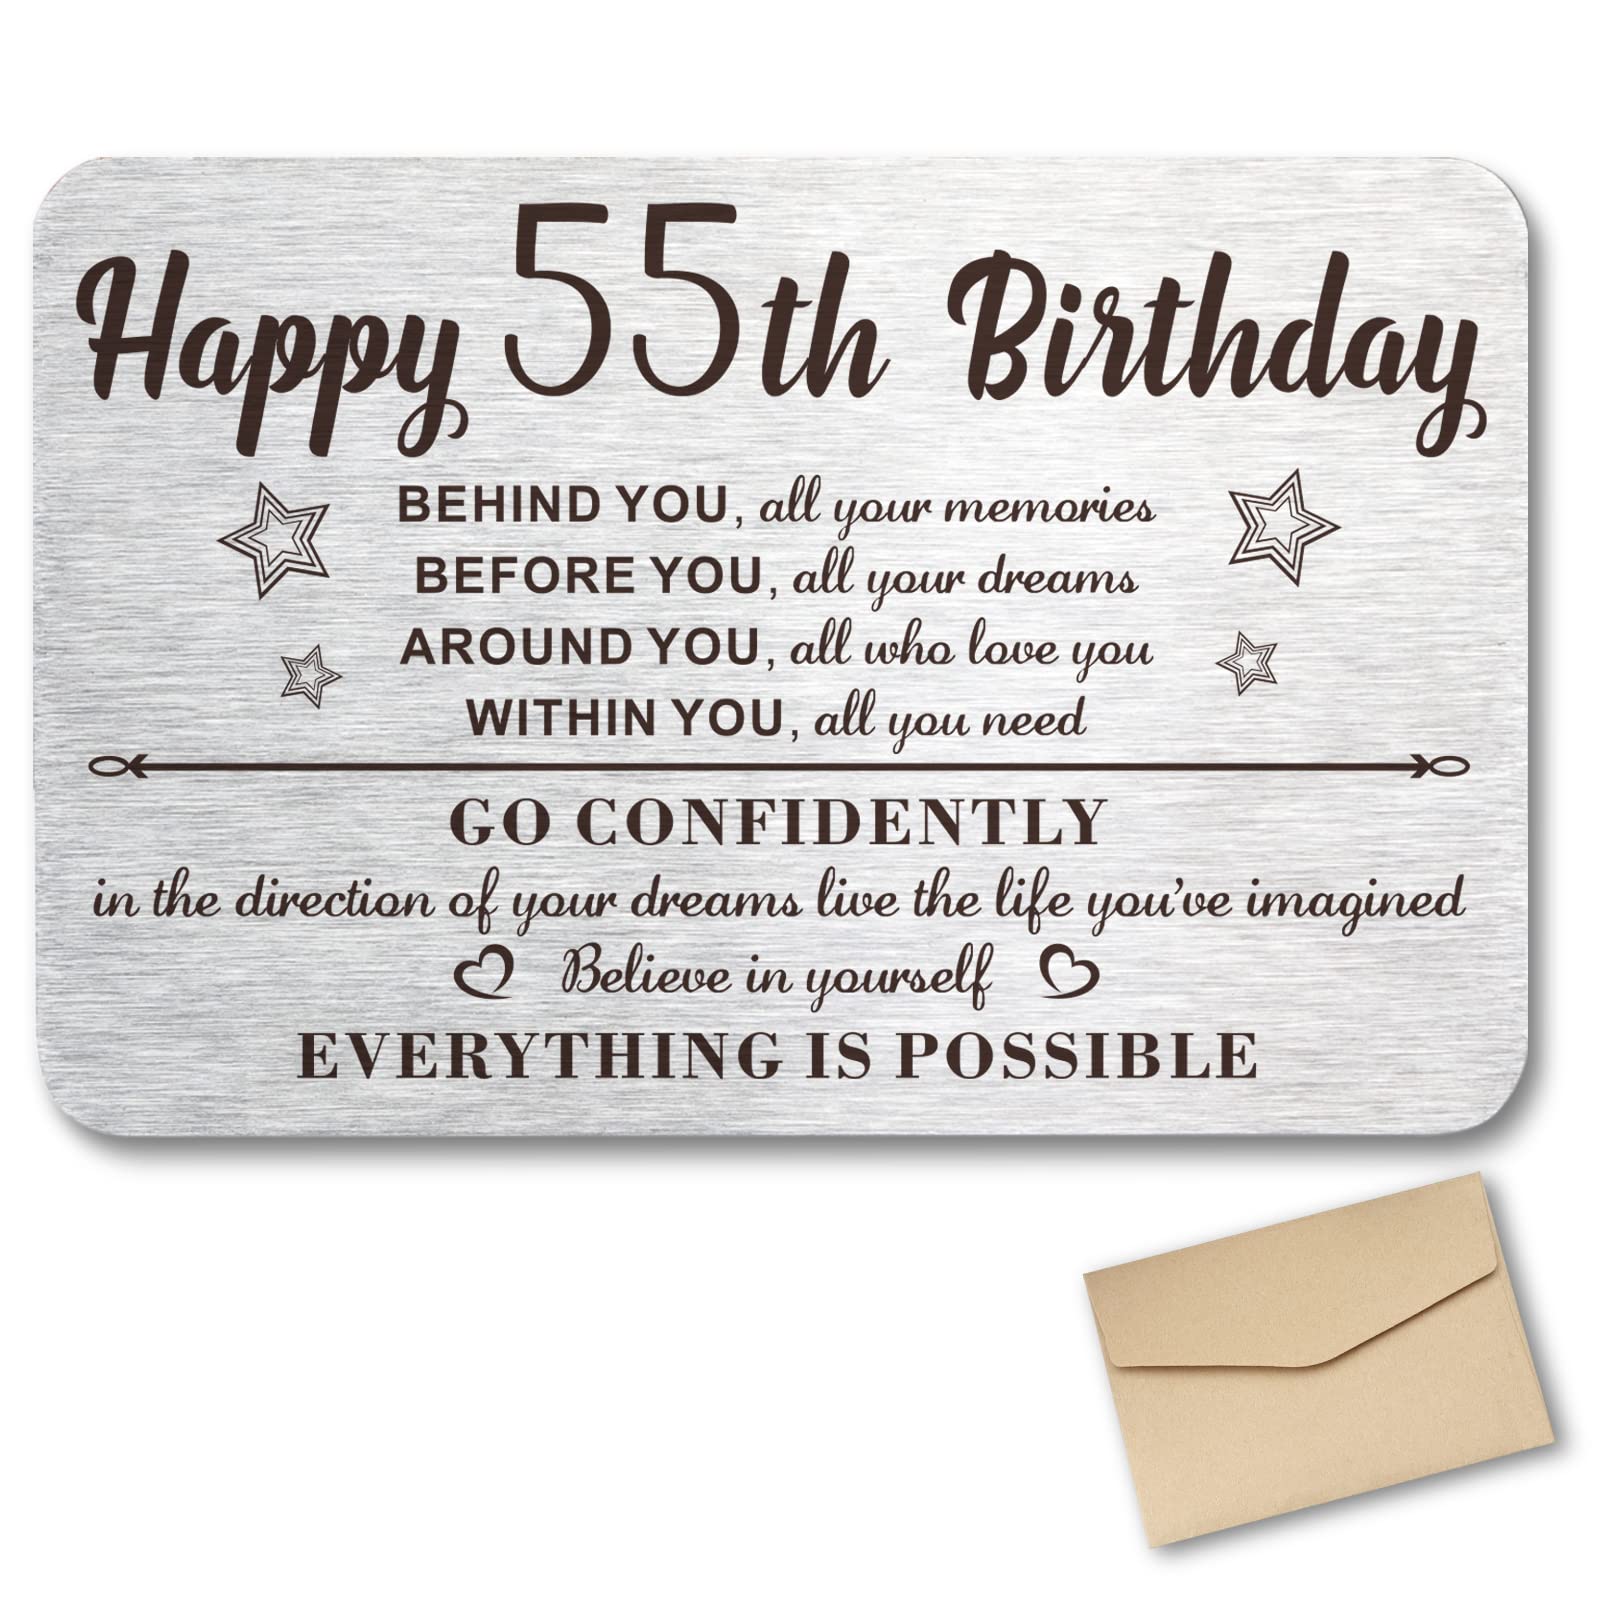 birthday gift ideas for her 55th